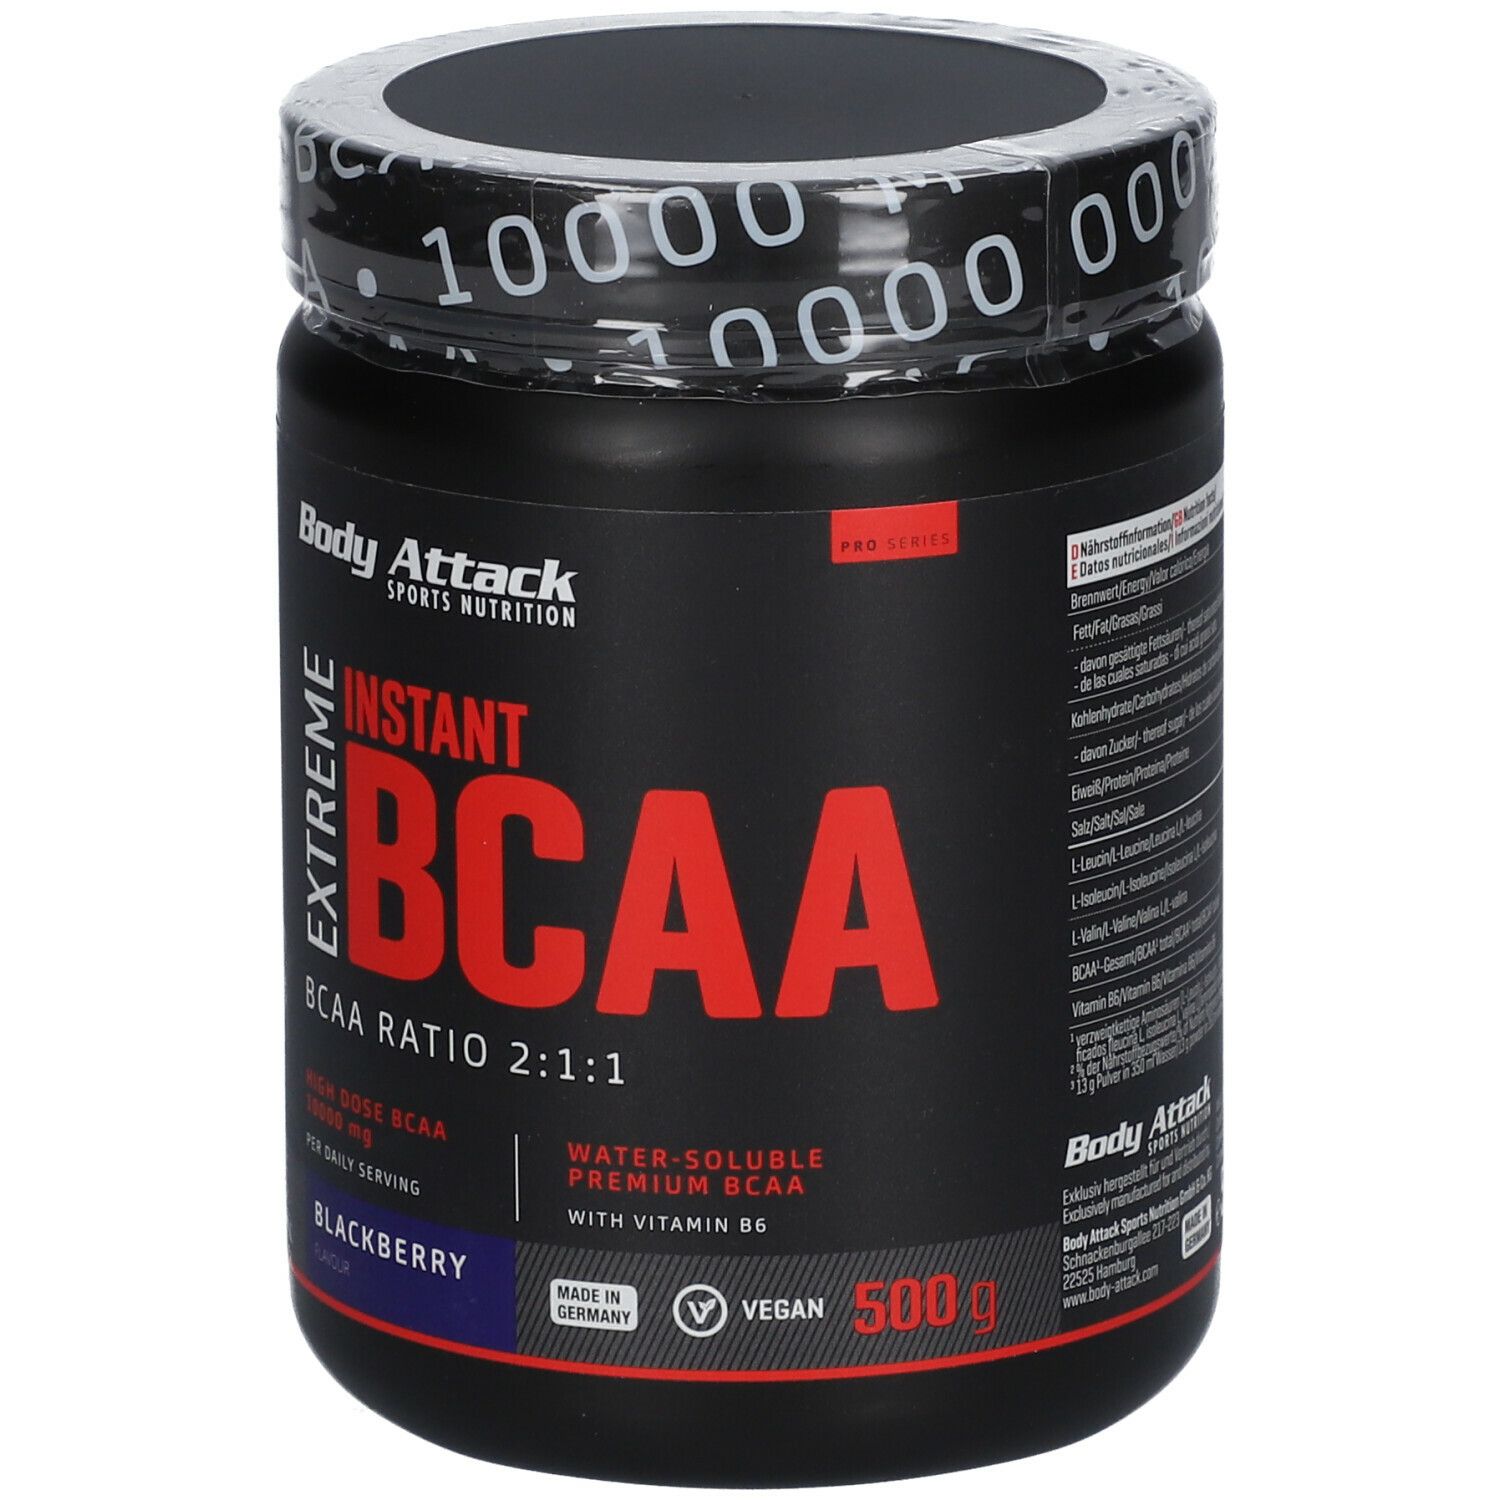 Body Attack Extreme Instant BCAA Blackberry